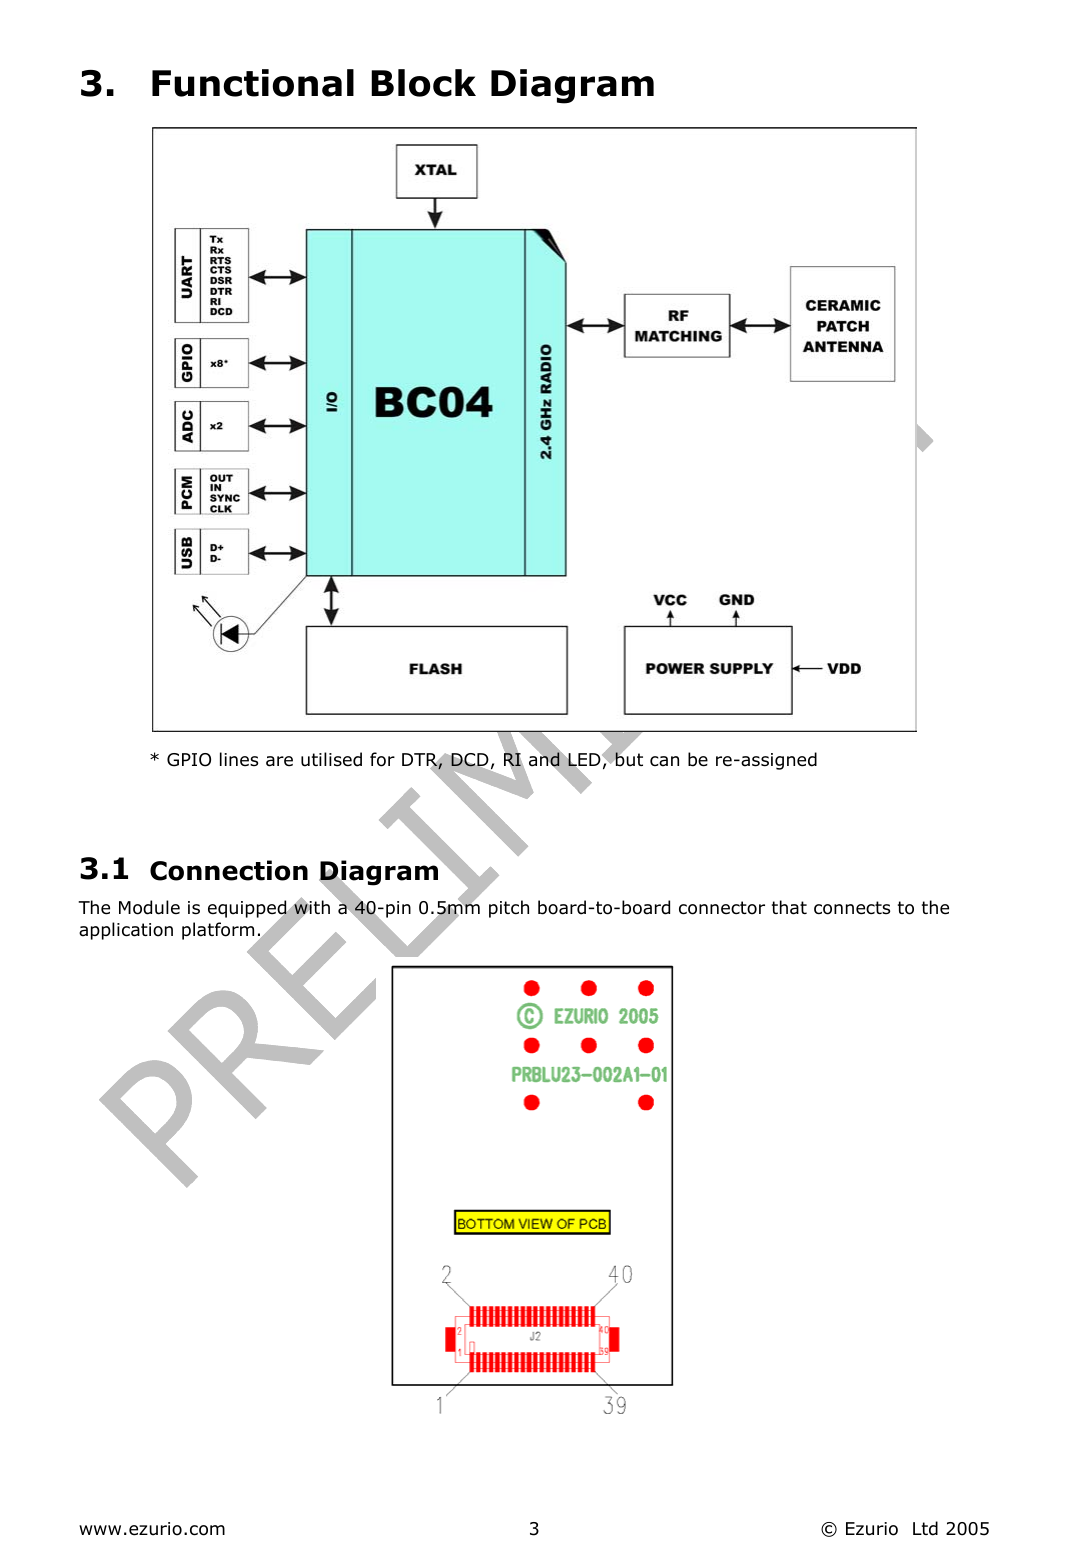  www.ezurio.com  © Ezurio  Ltd 2005 33.  Functional Block Diagram  * GPIO lines are utilised for DTR, DCD, RI and LED, but can be re-assigned  3.1  Connection Diagram The Module is equipped with a 40-pin 0.5mm pitch board-to-board connector that connects to the application platform.   